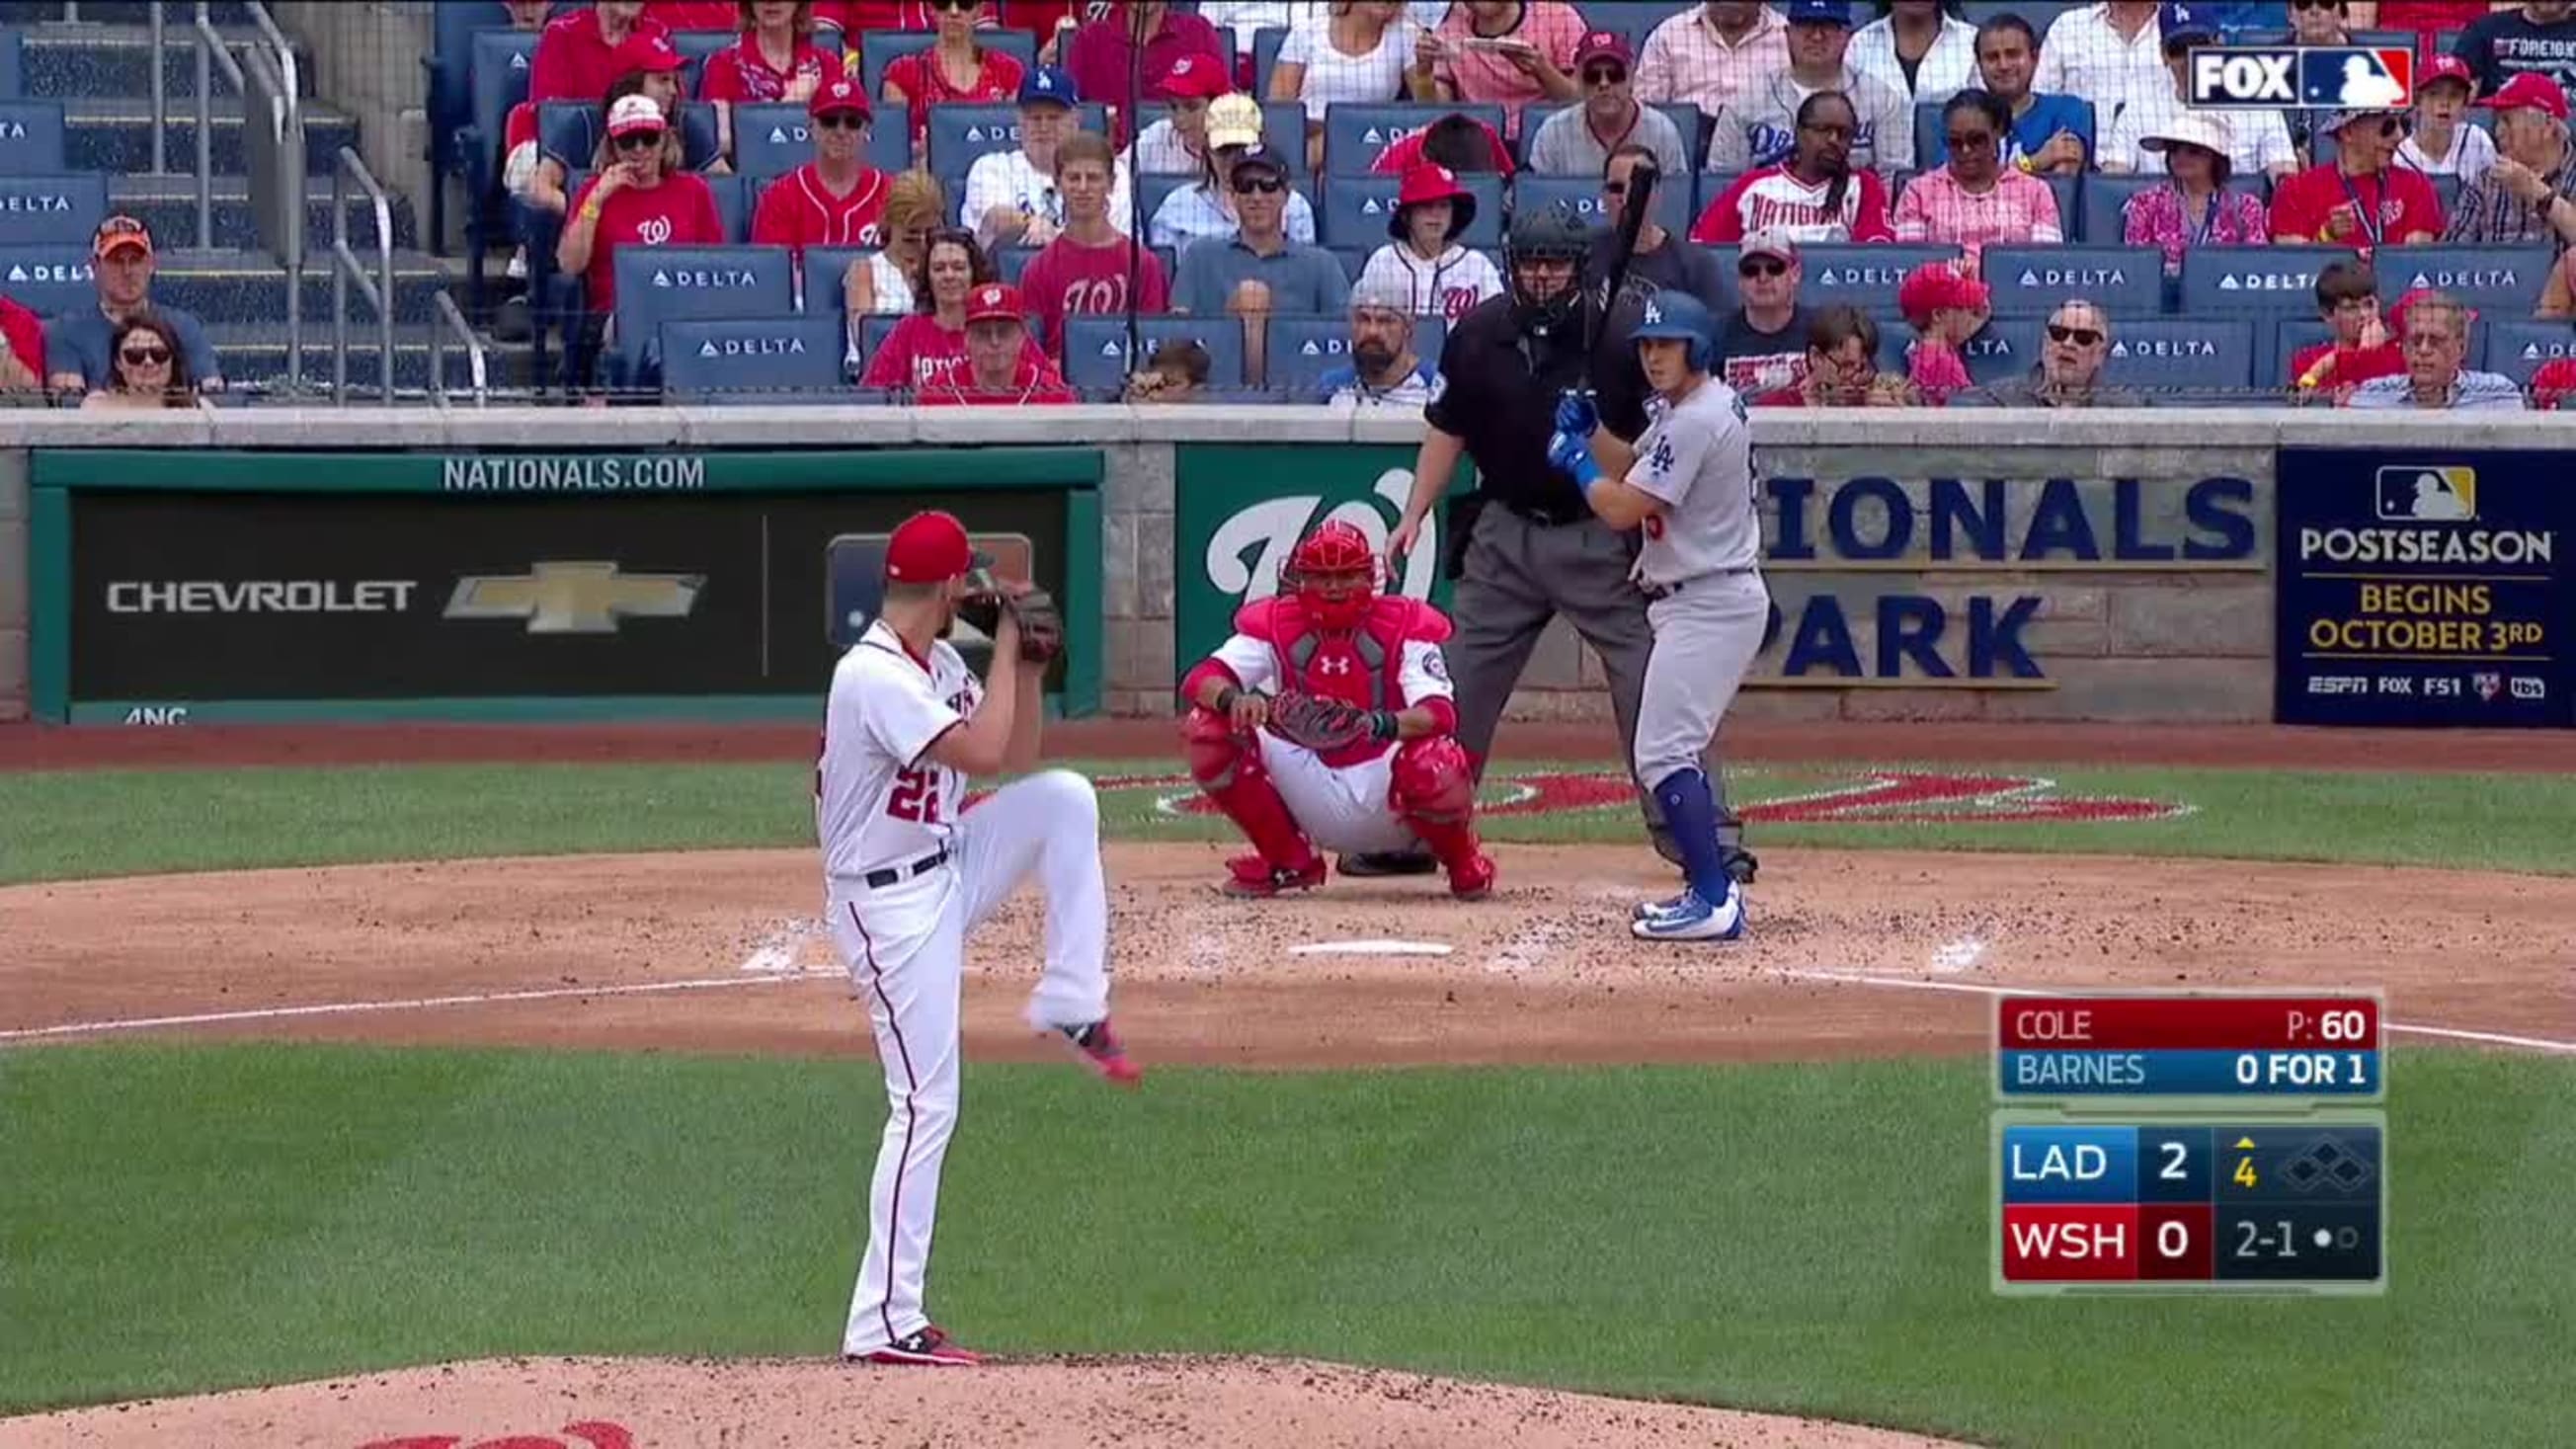 Austin Barnes doubles (2) on a sharp line drive to right fielder